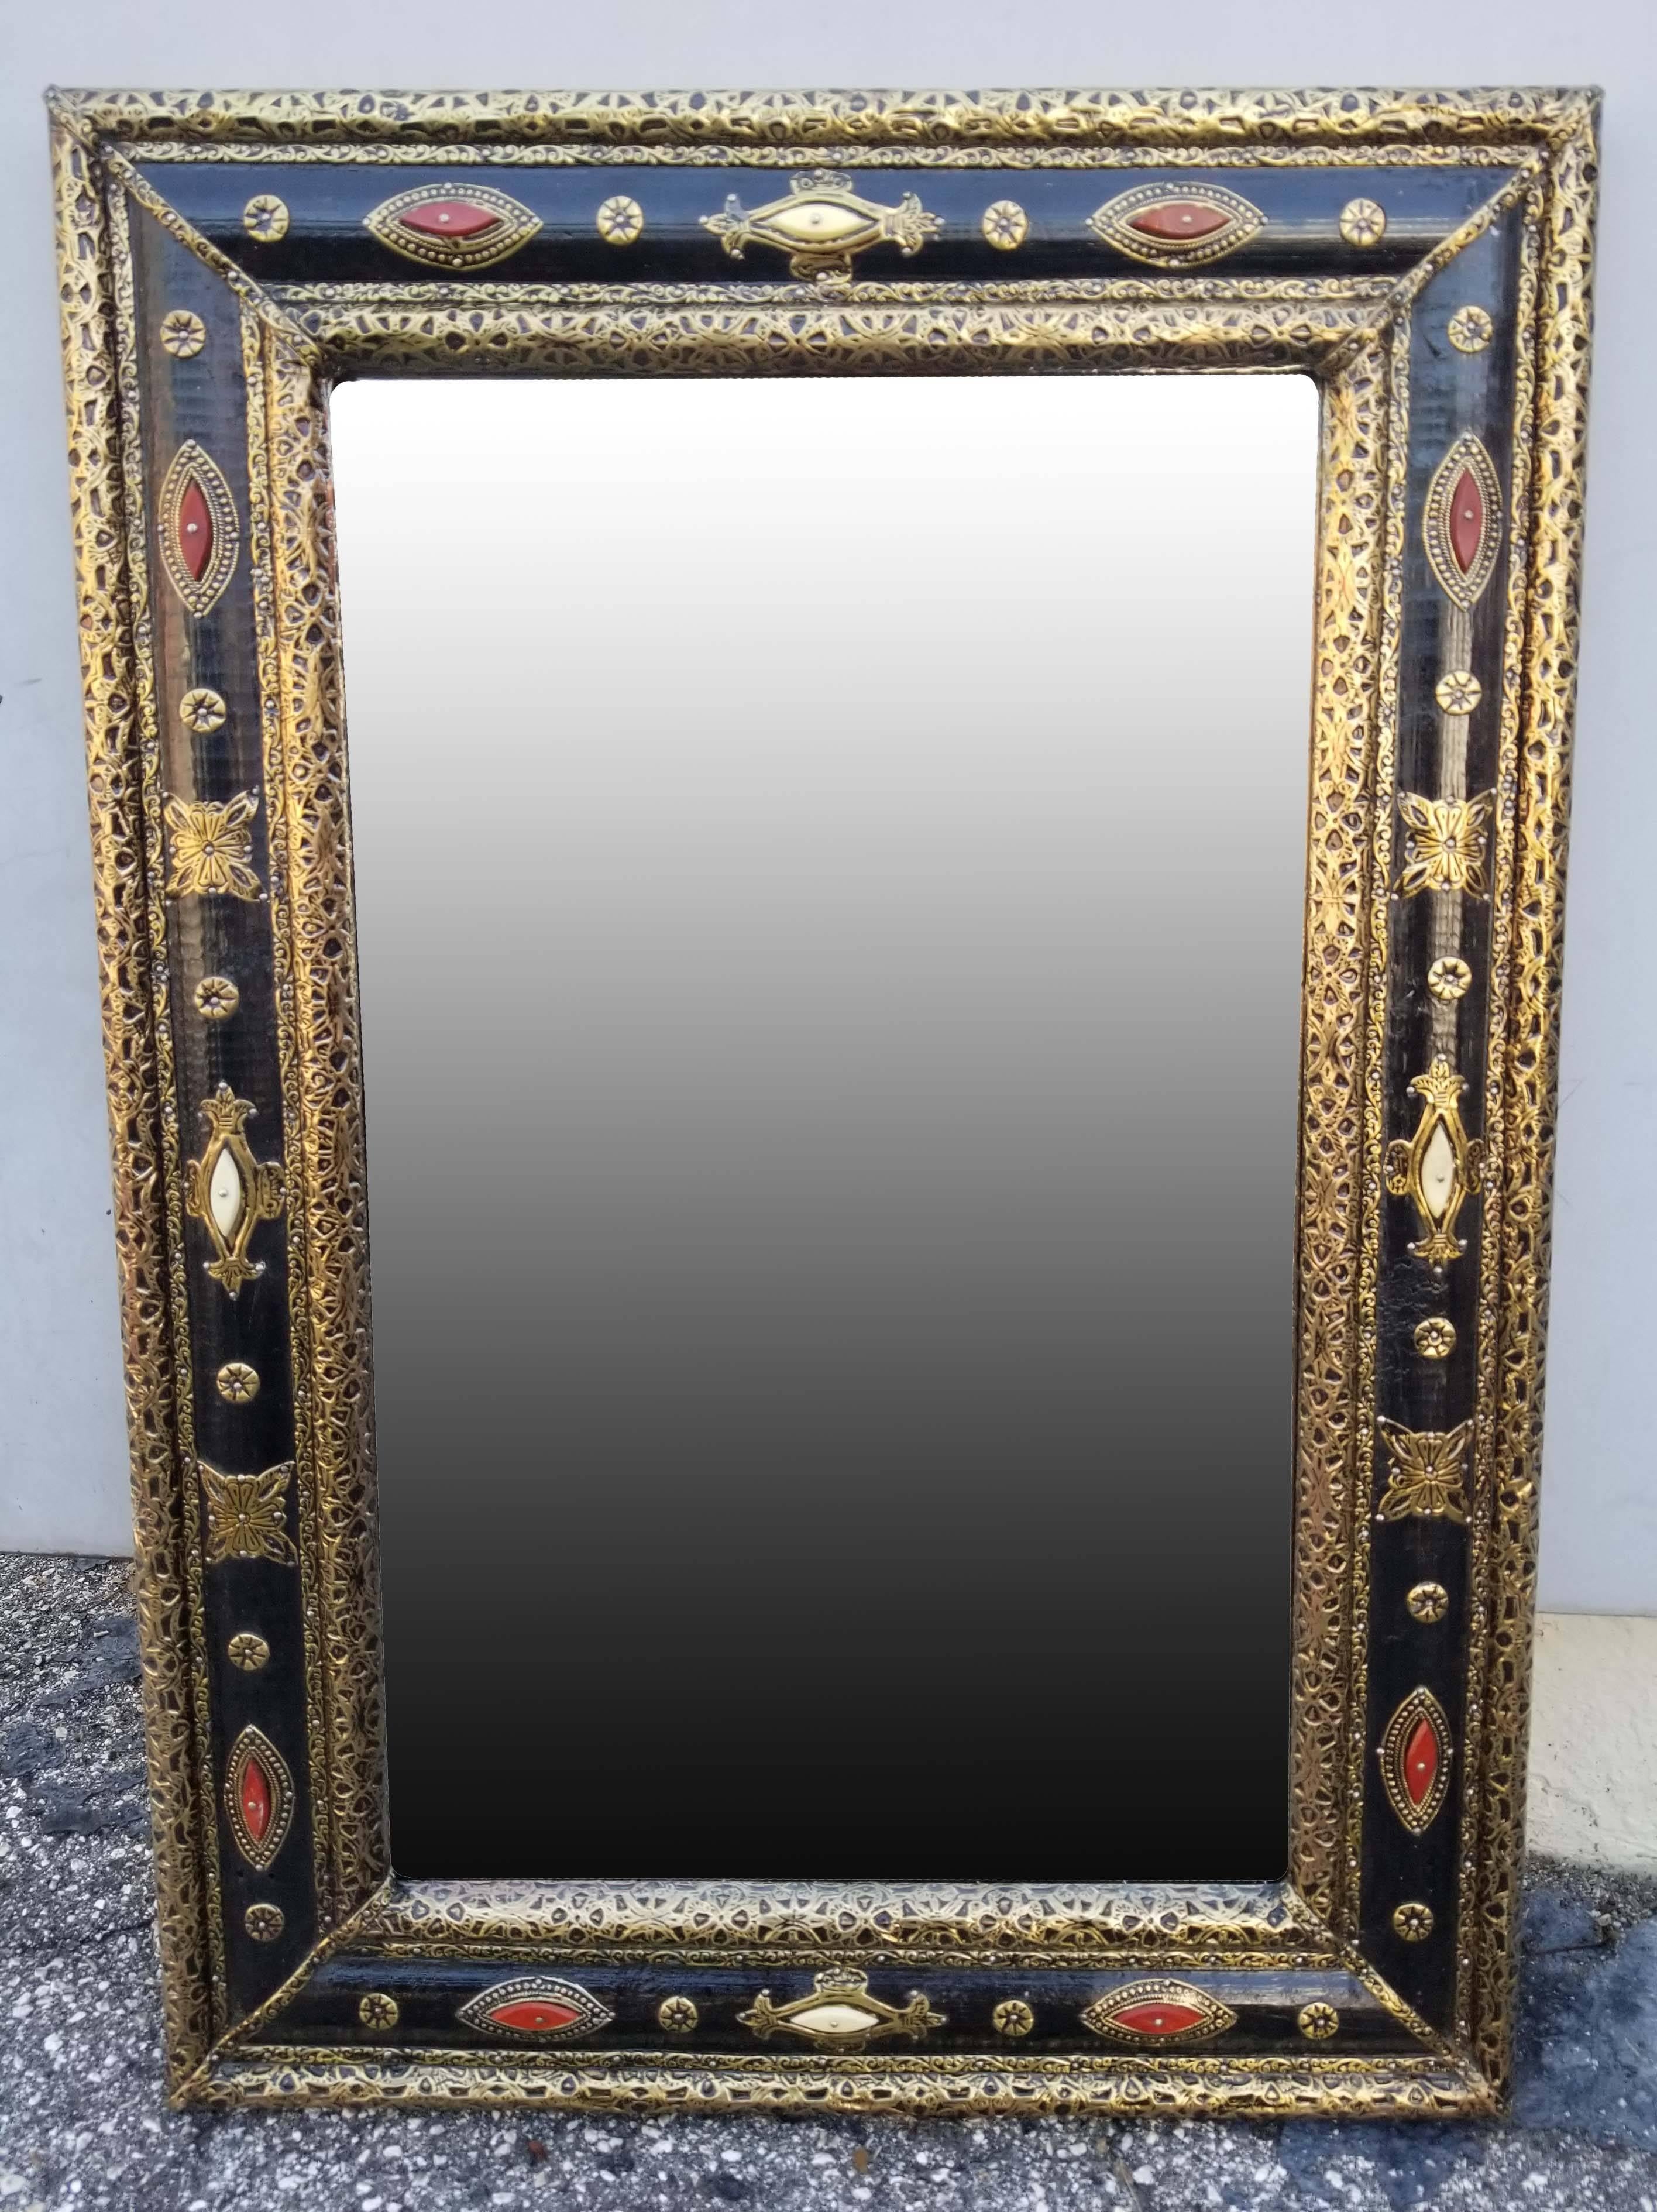 Large metal inlaid and camel bone Moroccan mirror. Made in the city of Marrakech. Rectangular shape measuring approximately 28